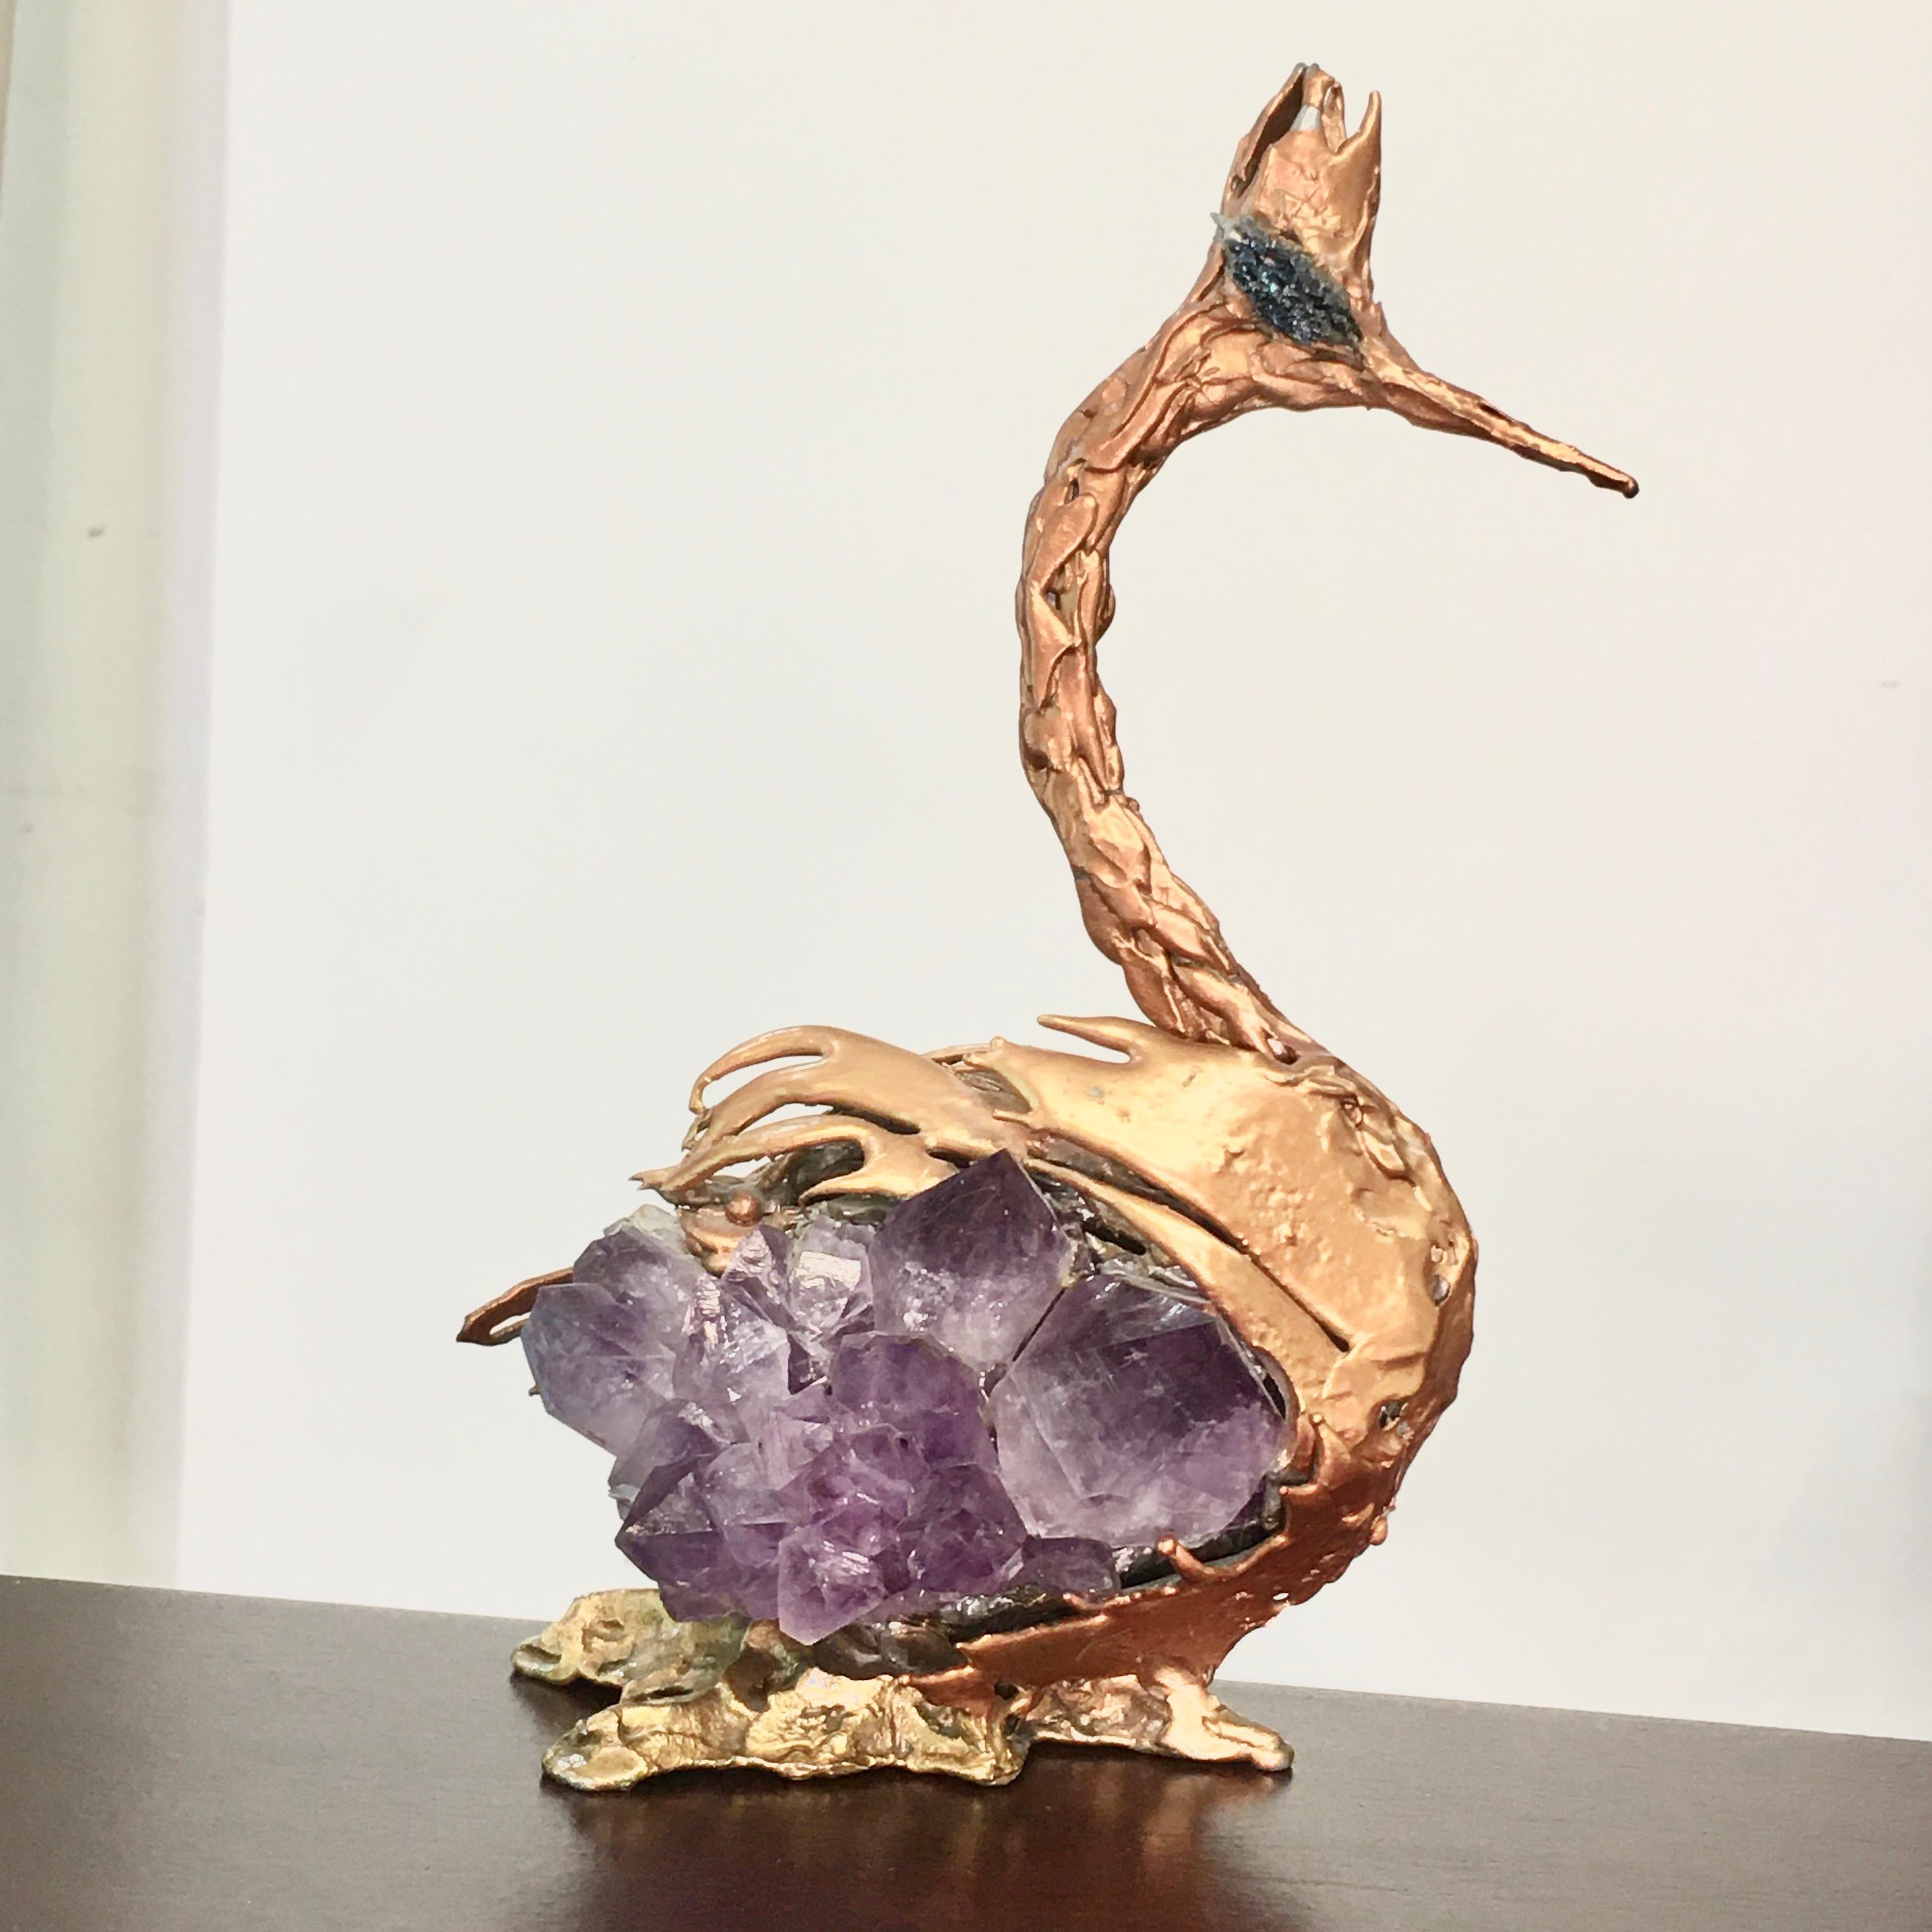 Exploded bronze dore sculpture of a heron encrusted with amethyst rock crystal and small blue mineral elements for eyes. (lapus lazuli?)
Faint marking on the underside. Indecipherable.
Initially I reached out to Claude Victor Boeltz who confirmed